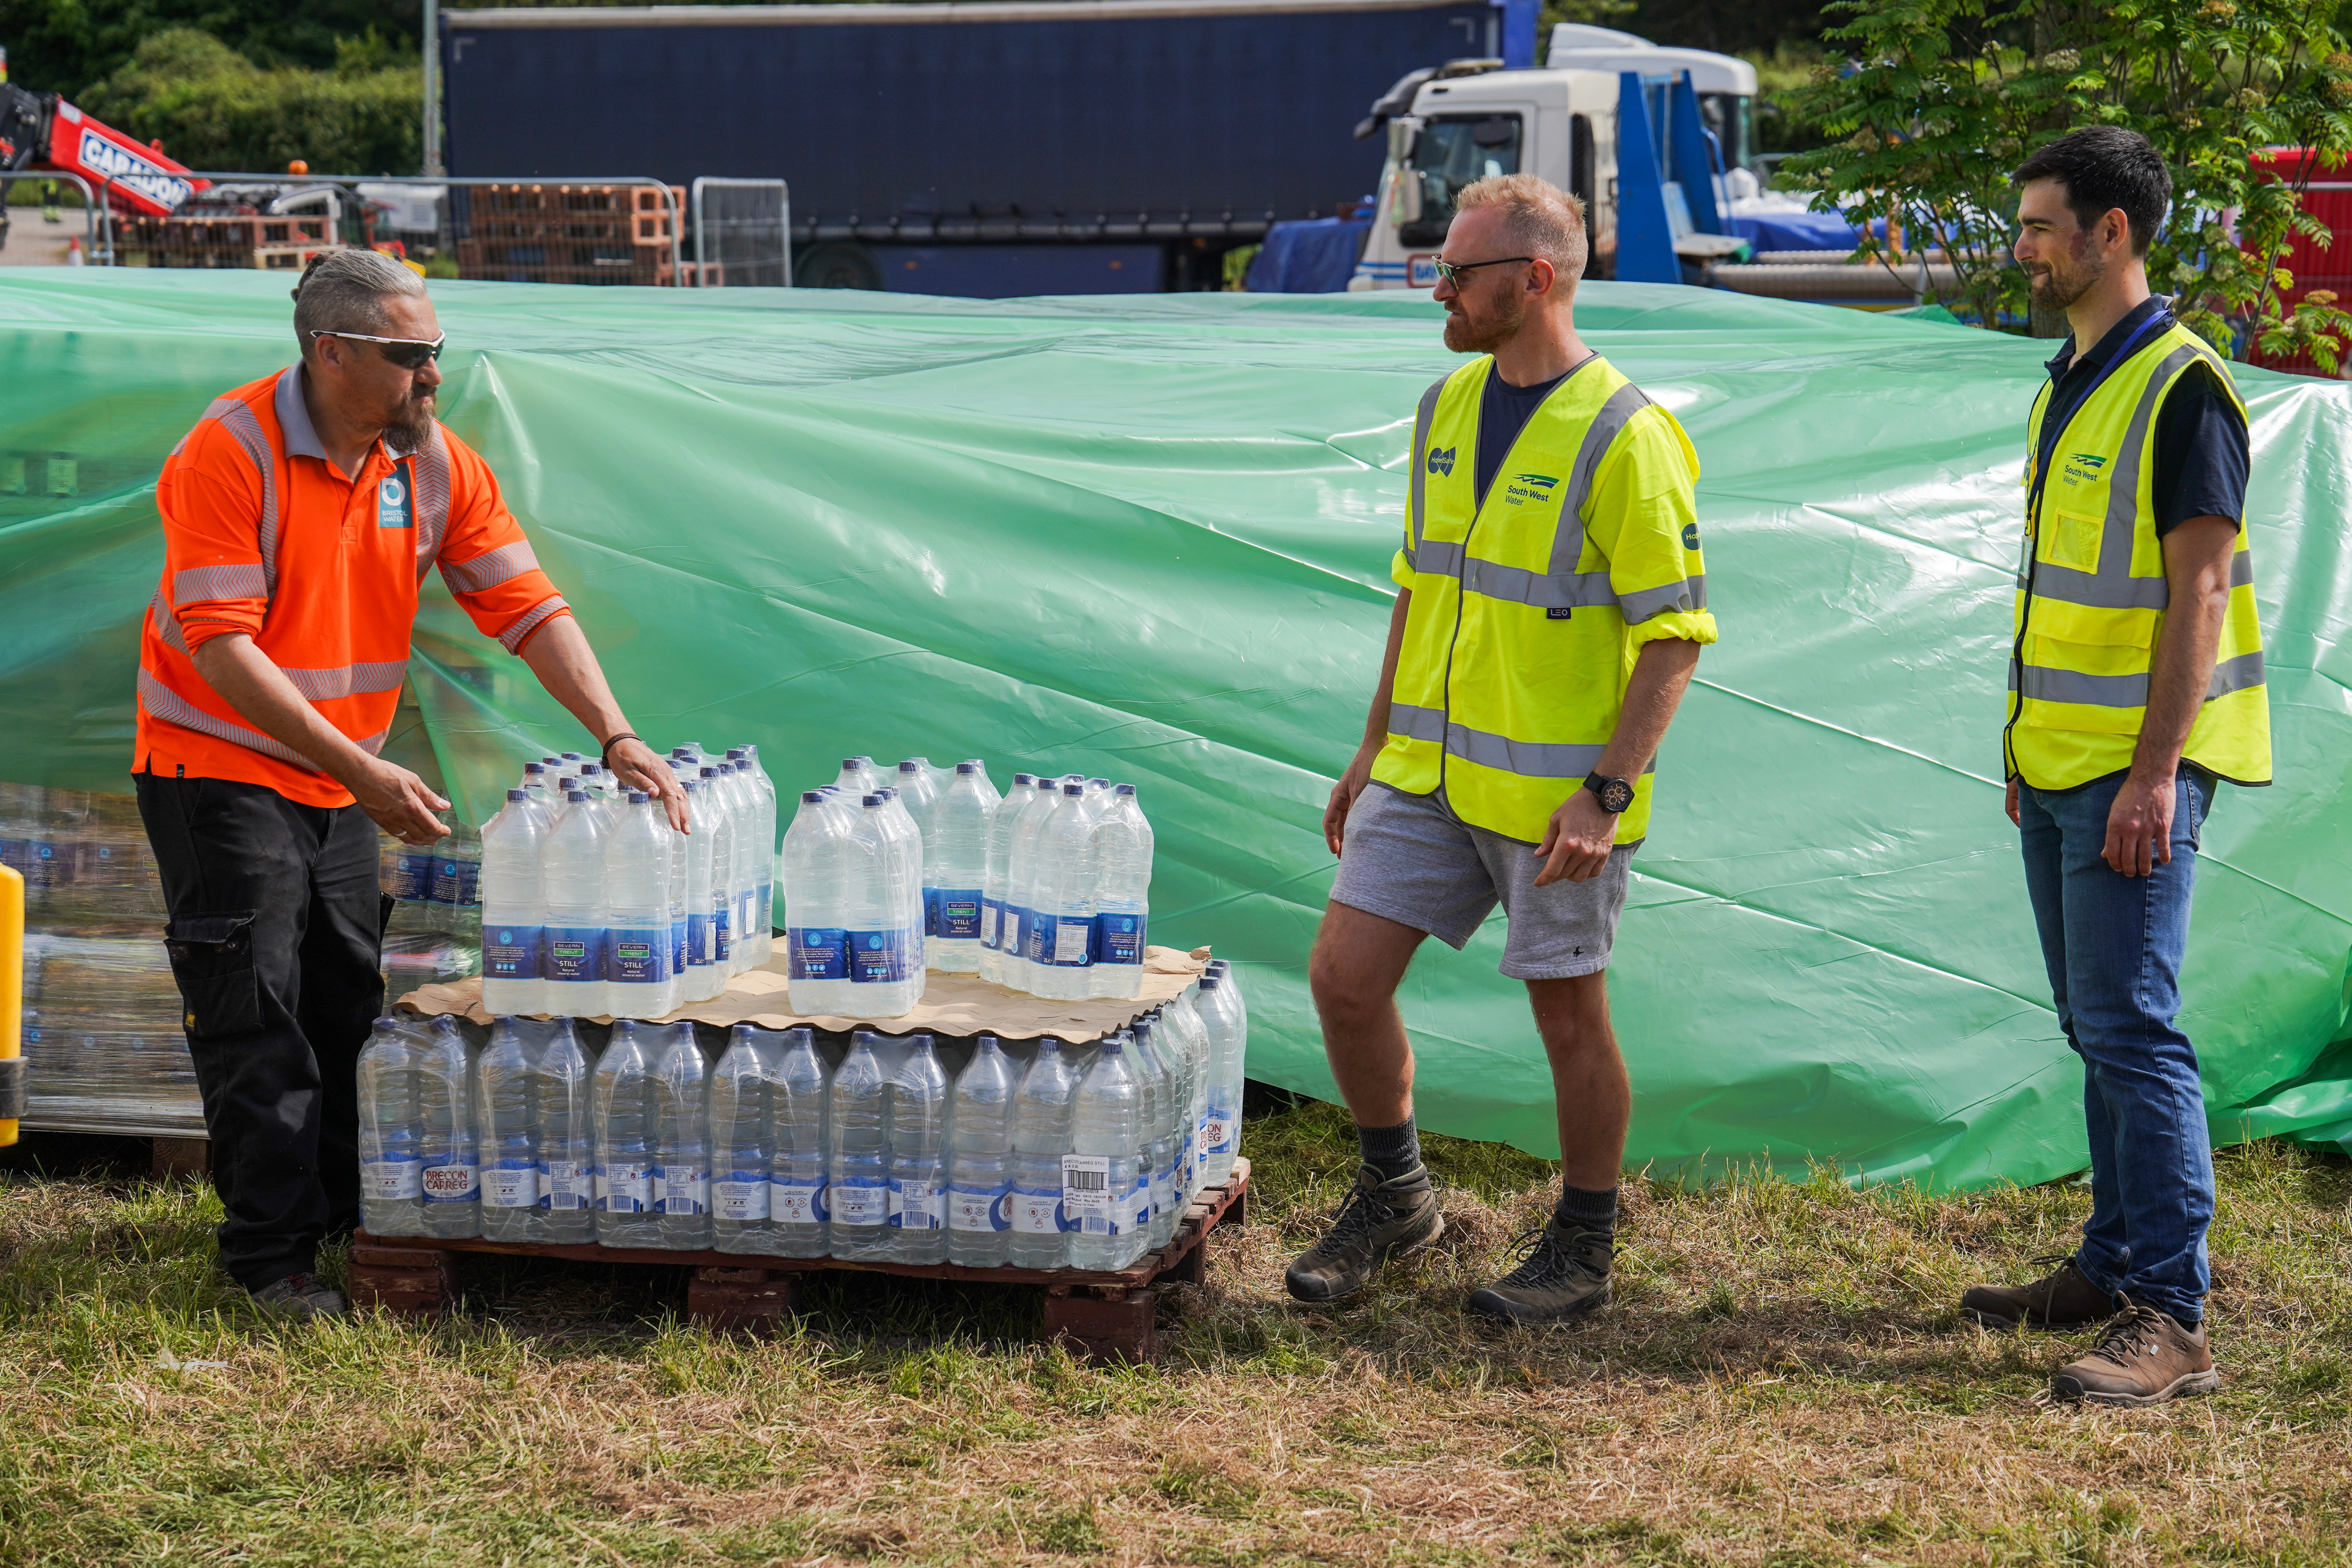 South West Water staff and volunteers distribute water to the public at a water collection point in Brixham on Saturday